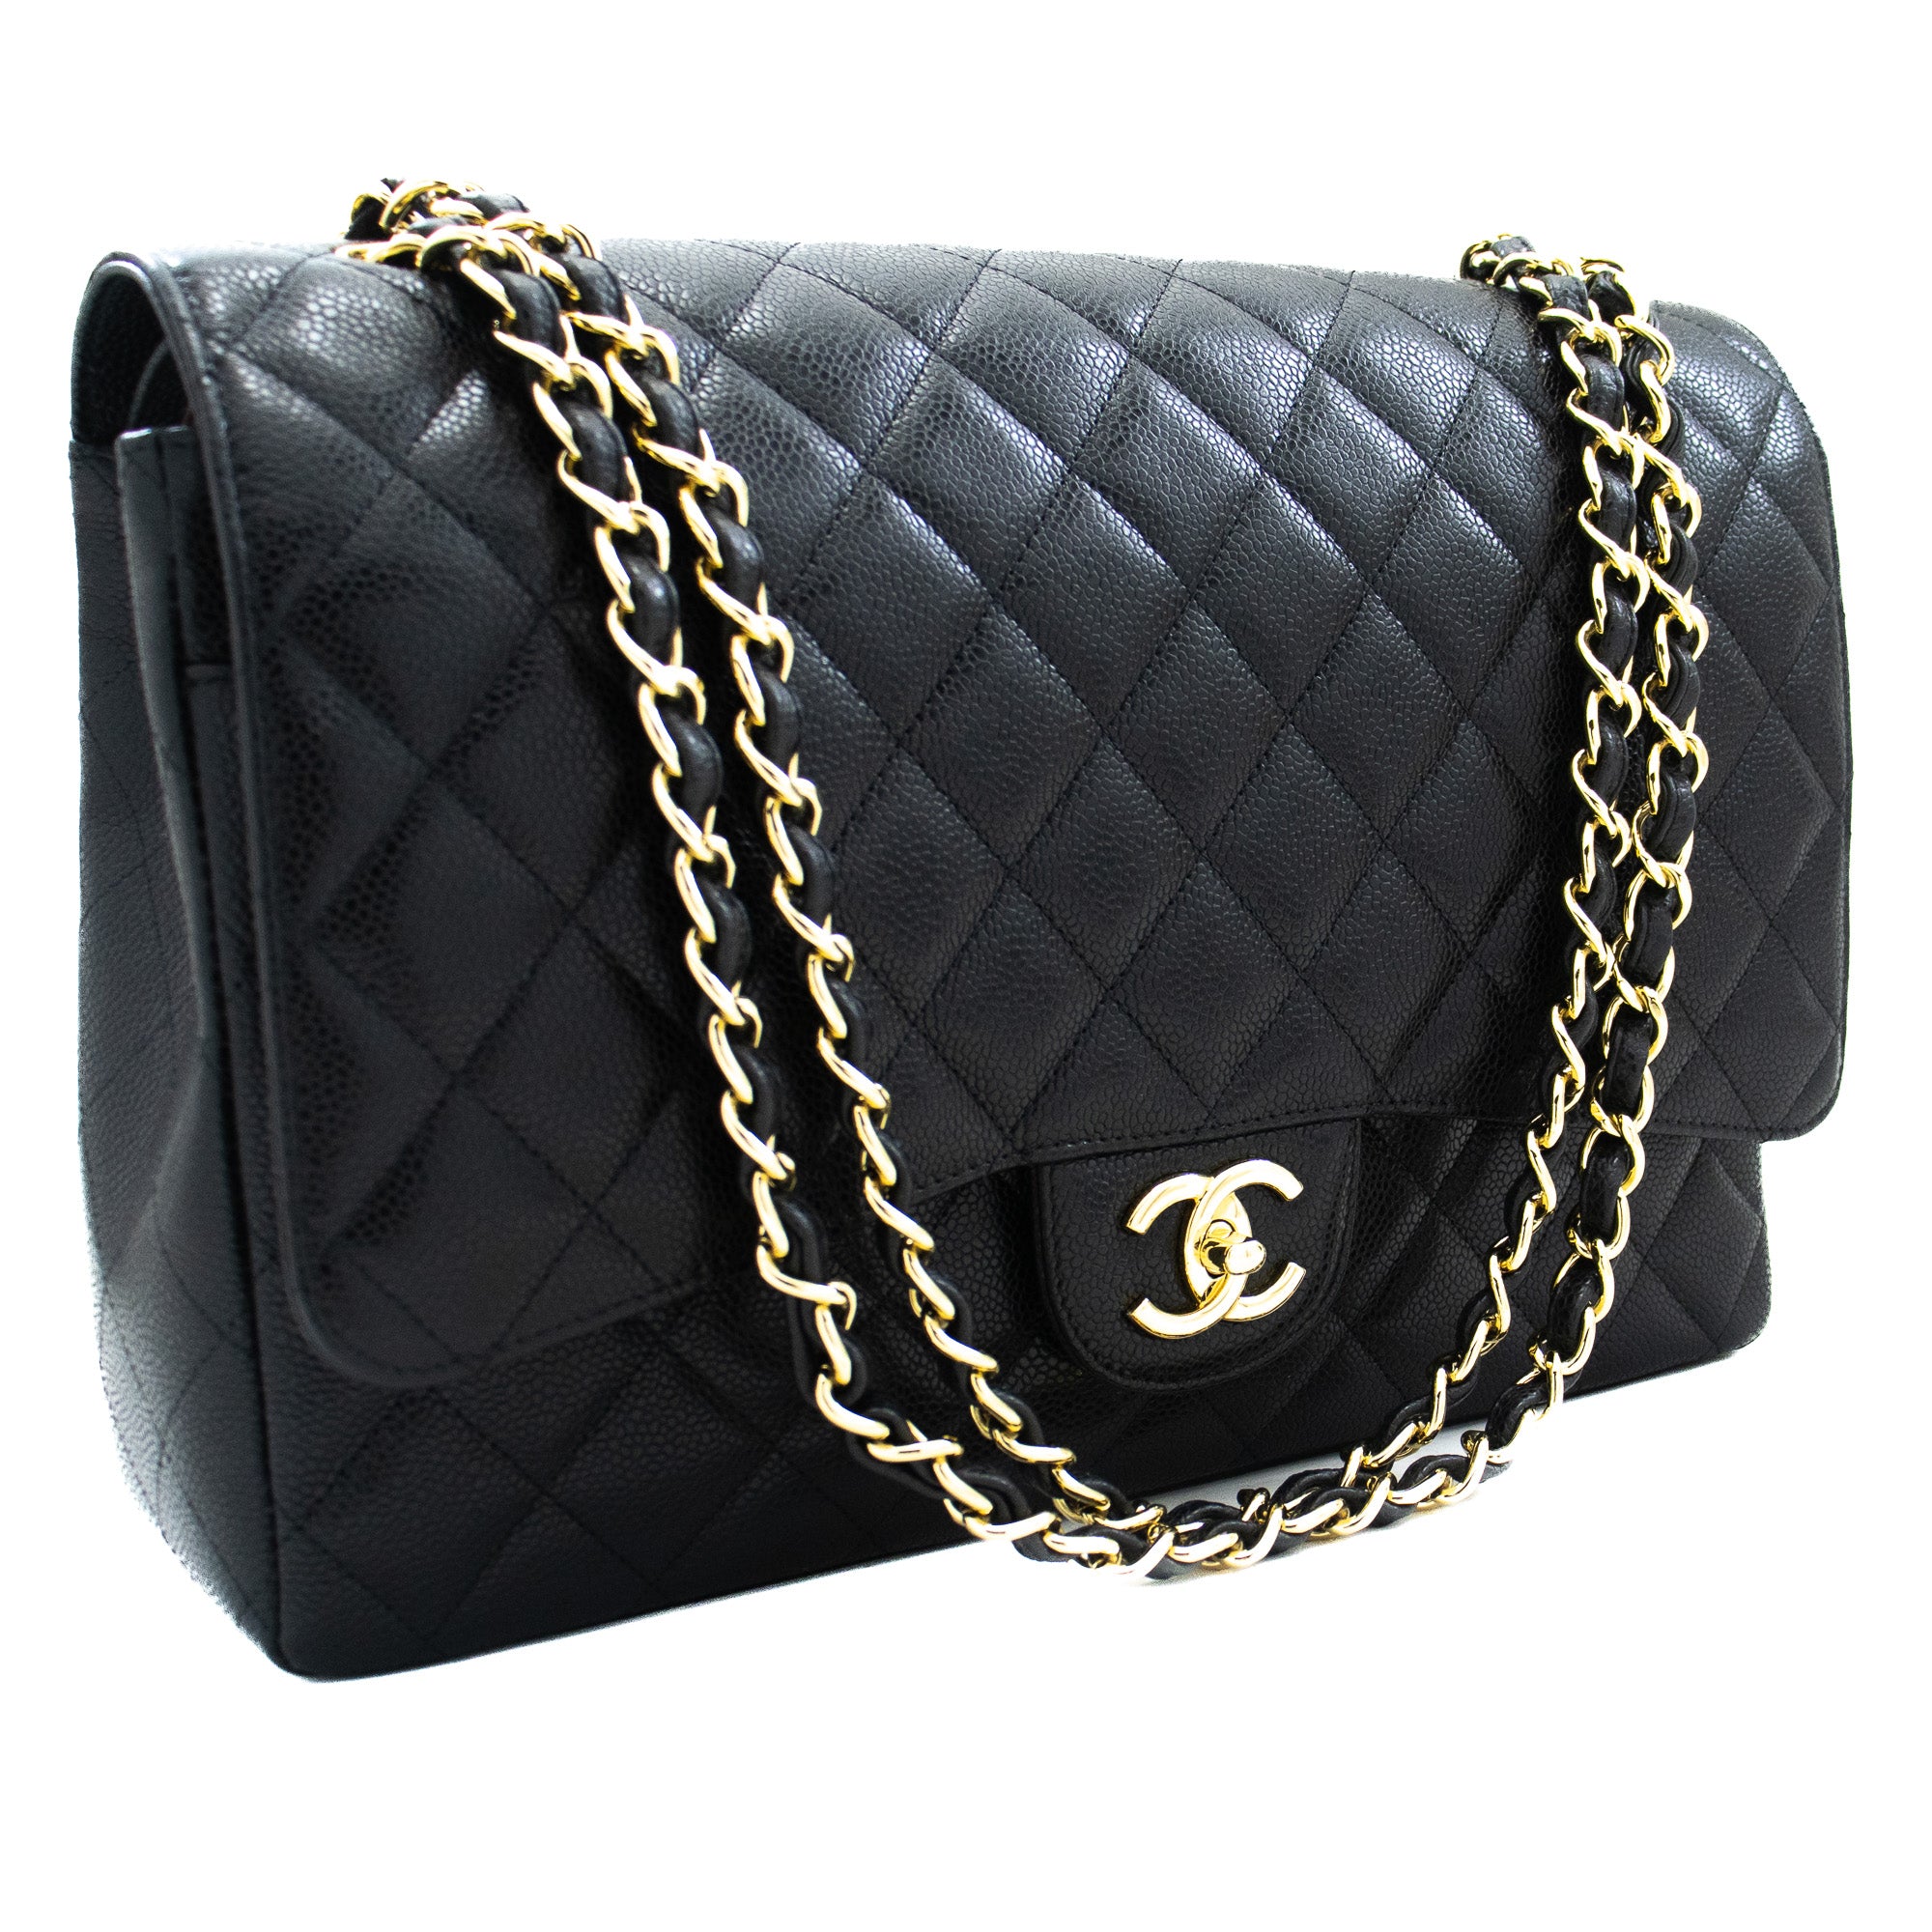 Chanel Maxi Classic Double Flap Bag in Black Quilted Caviar